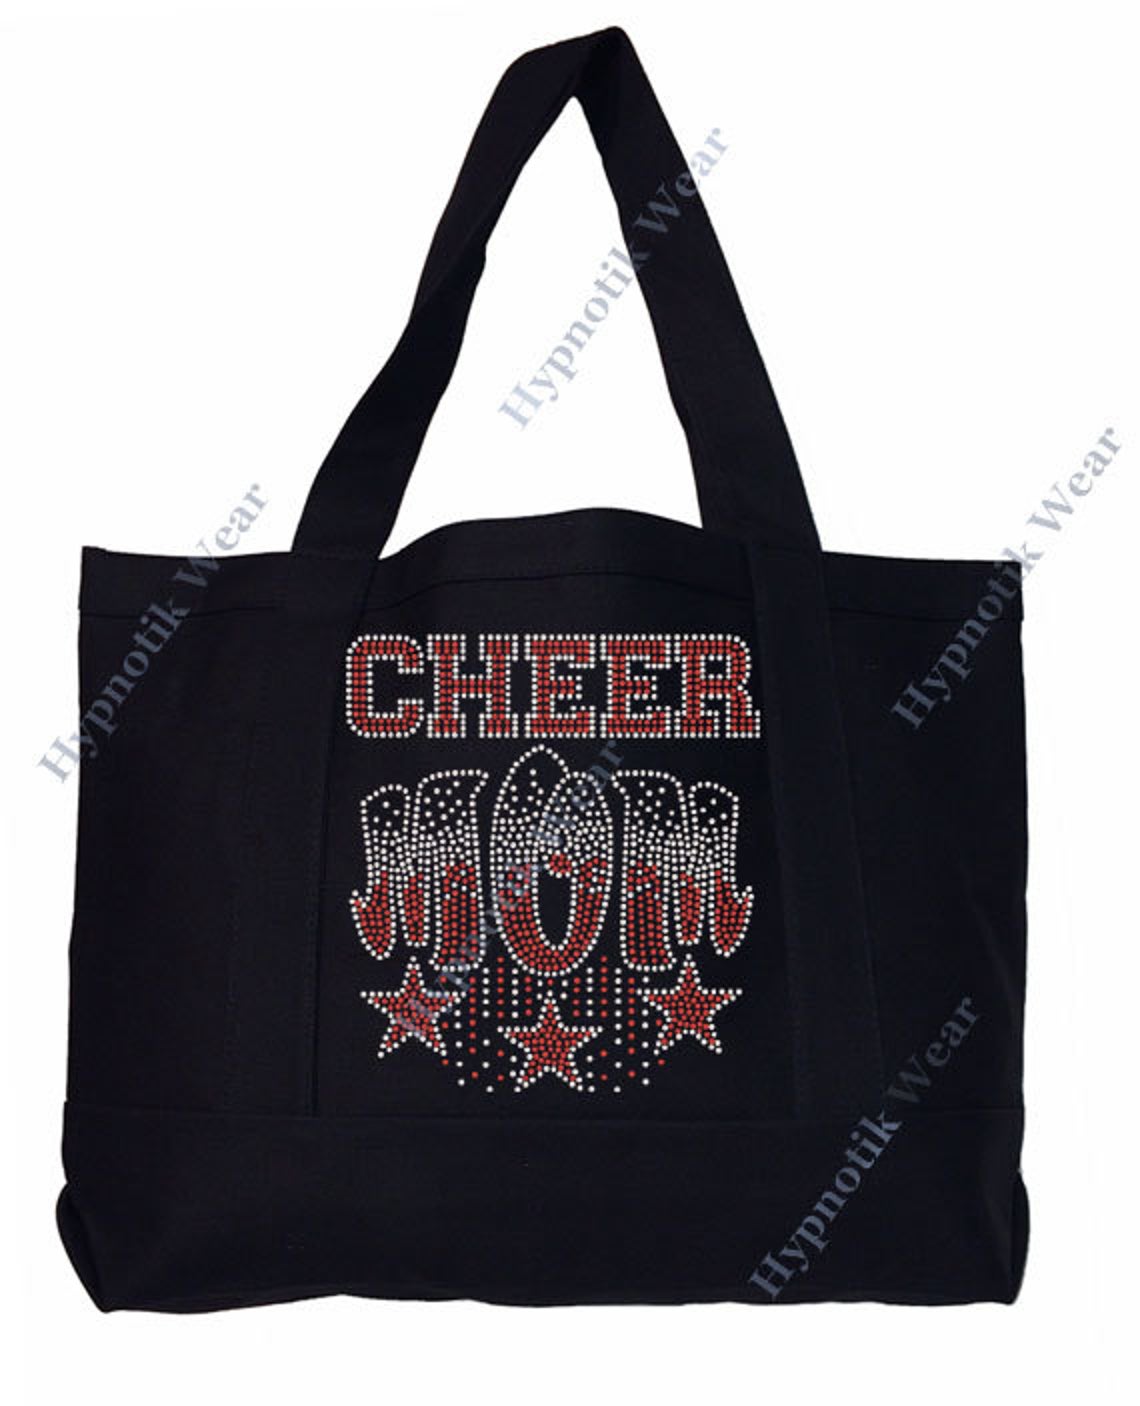 Rhinestone Sturdy Tote Bag with Zipper & Front Pocket " Cheer Mom with Stars " in Various Color, Bling